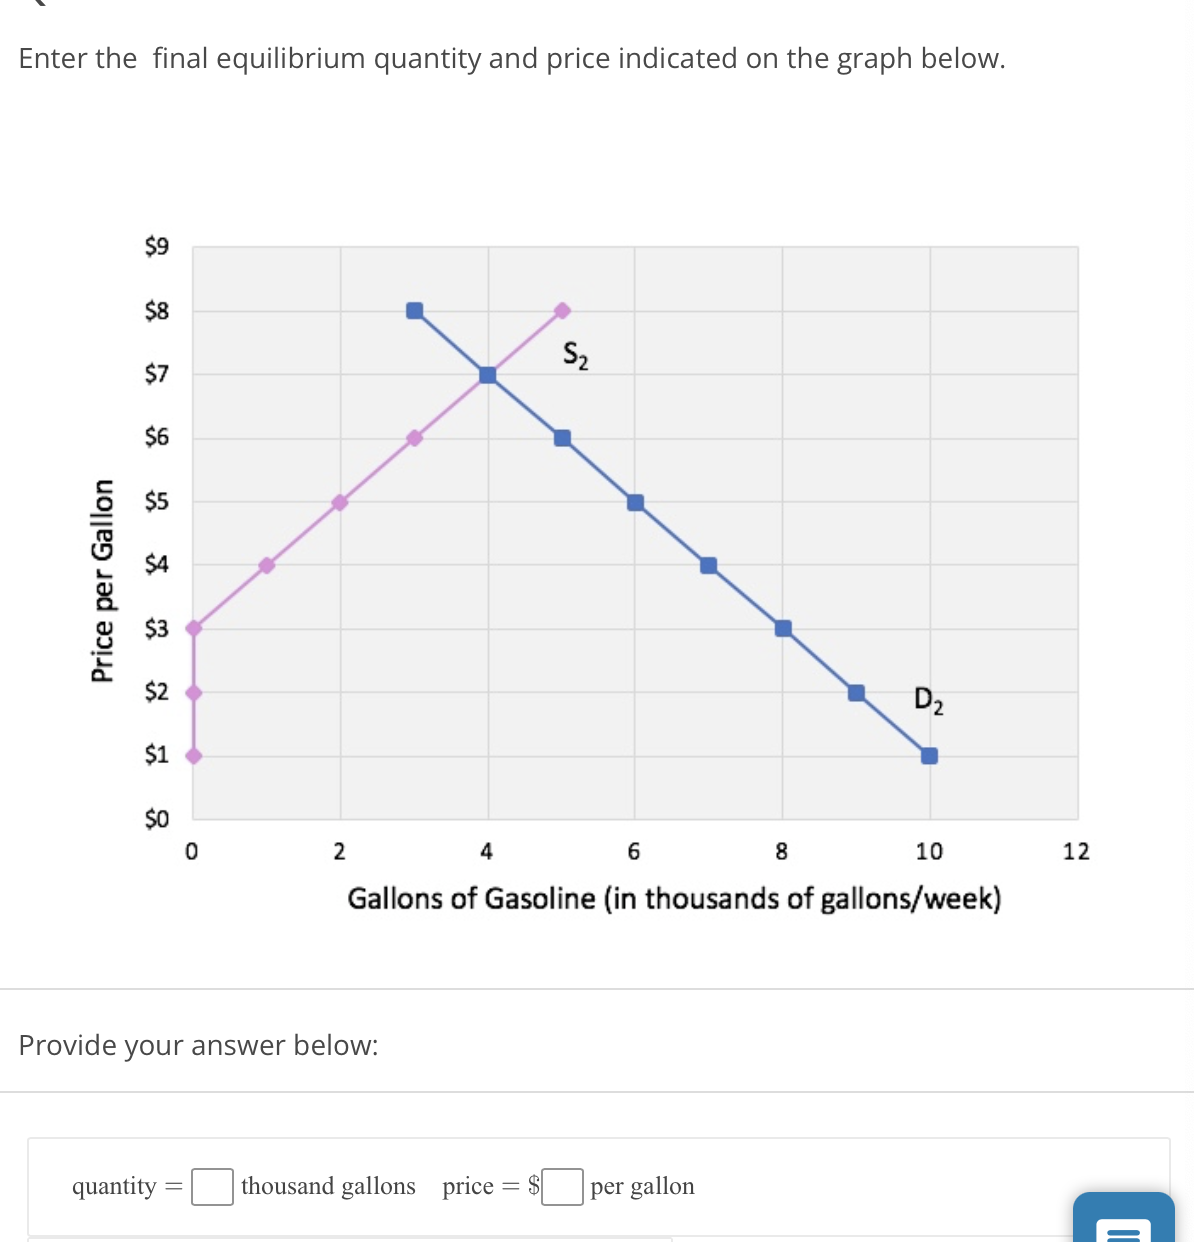 Enter the final equilibrium quantity and price indicated on the graph below.
$9
$8
S2
$7
$6
D2
$1
$0
4
8
10
12
Gallons of Gasoline (in thousands of gallons/week)
Provide your answer below:
quantity
thousand gallons price = $|
per gallon
Price per Gallon
